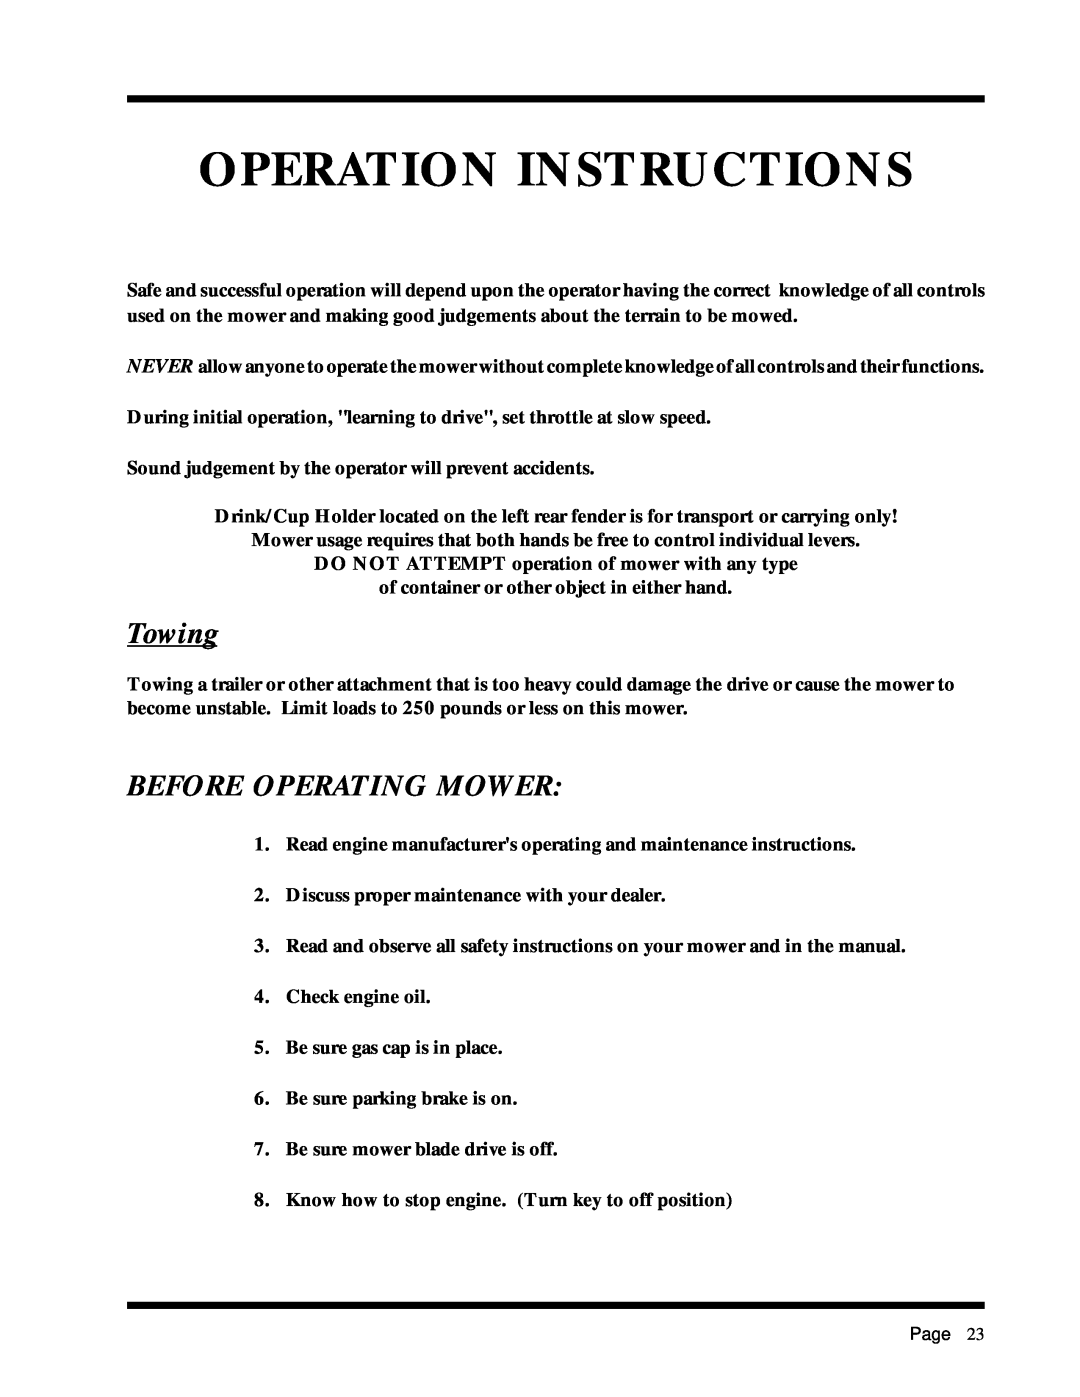 Dixon ZTR 2301 manual Operation Instructions, Towing, Before Operating Mower 